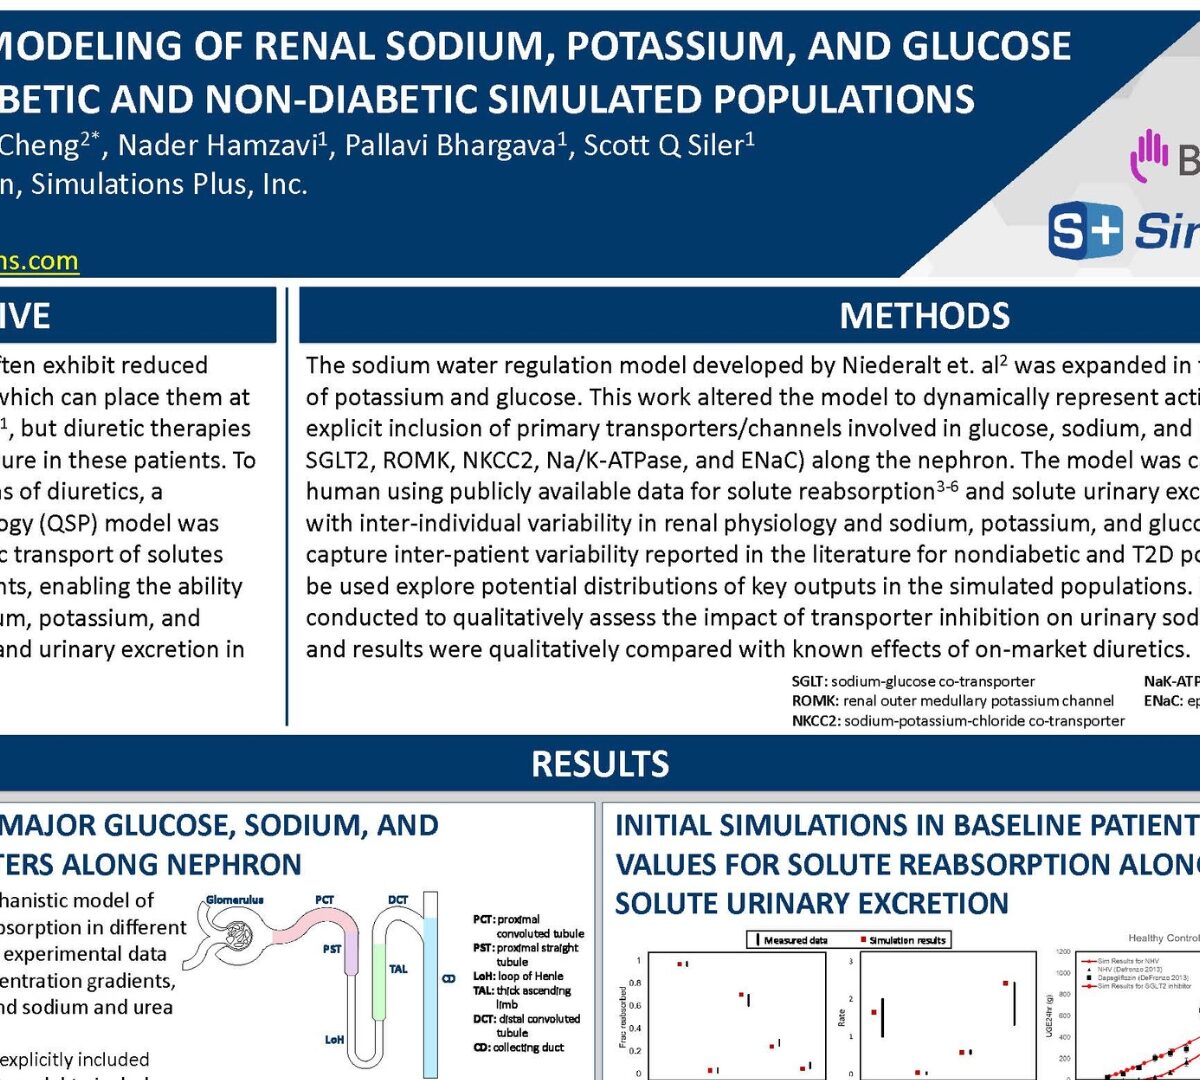 Mathematical Modeling of Renal Sodium, Potassium, and Glucose Dynamics in Diabetic and Non-Diabetic Simulated Populations